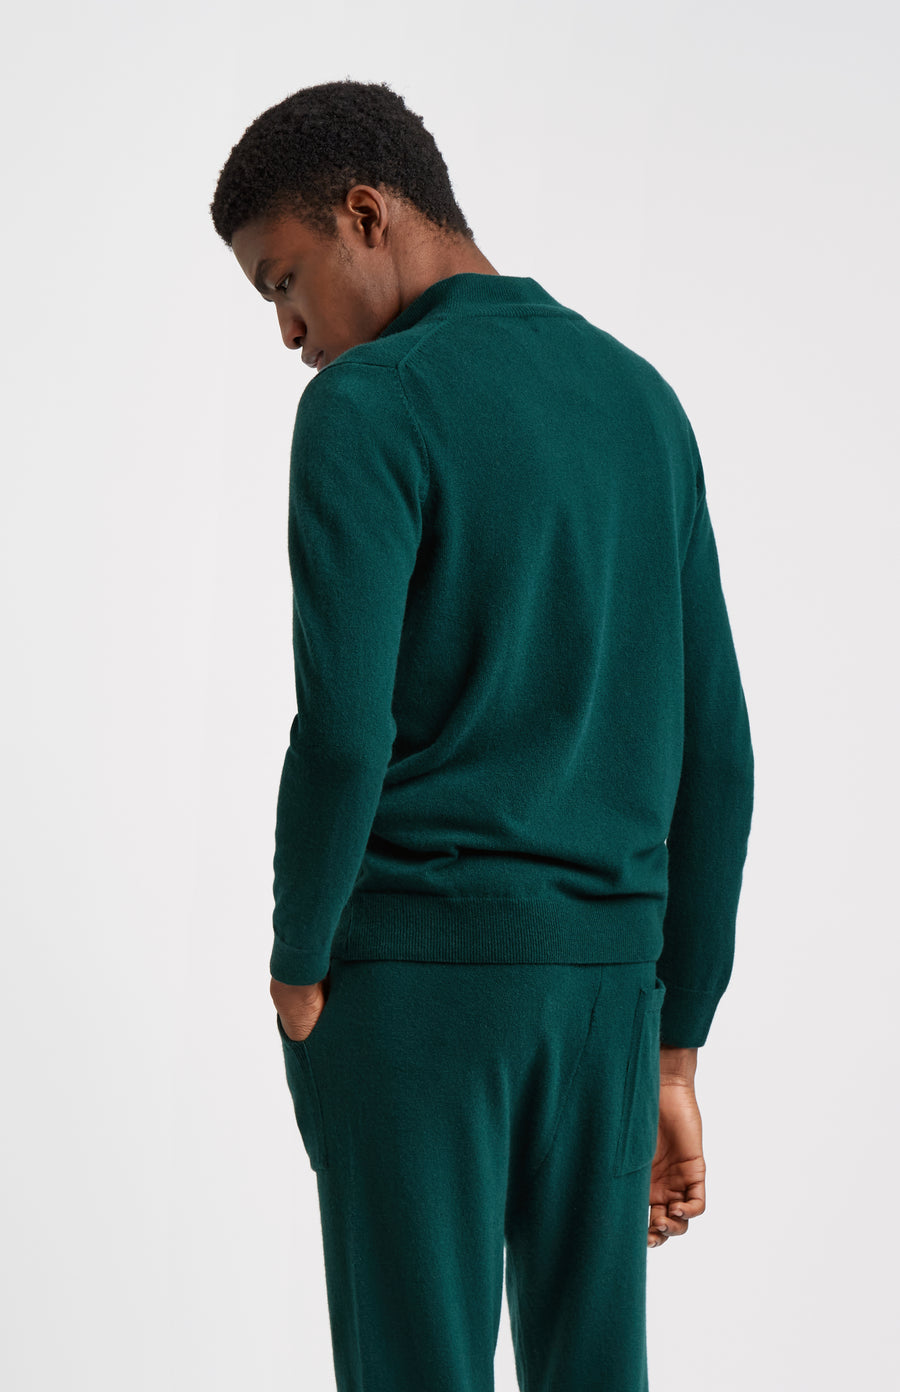 Pringle of Scotland Men's Knitted Merino Cashmere Joggers In Dark Teal with matching top